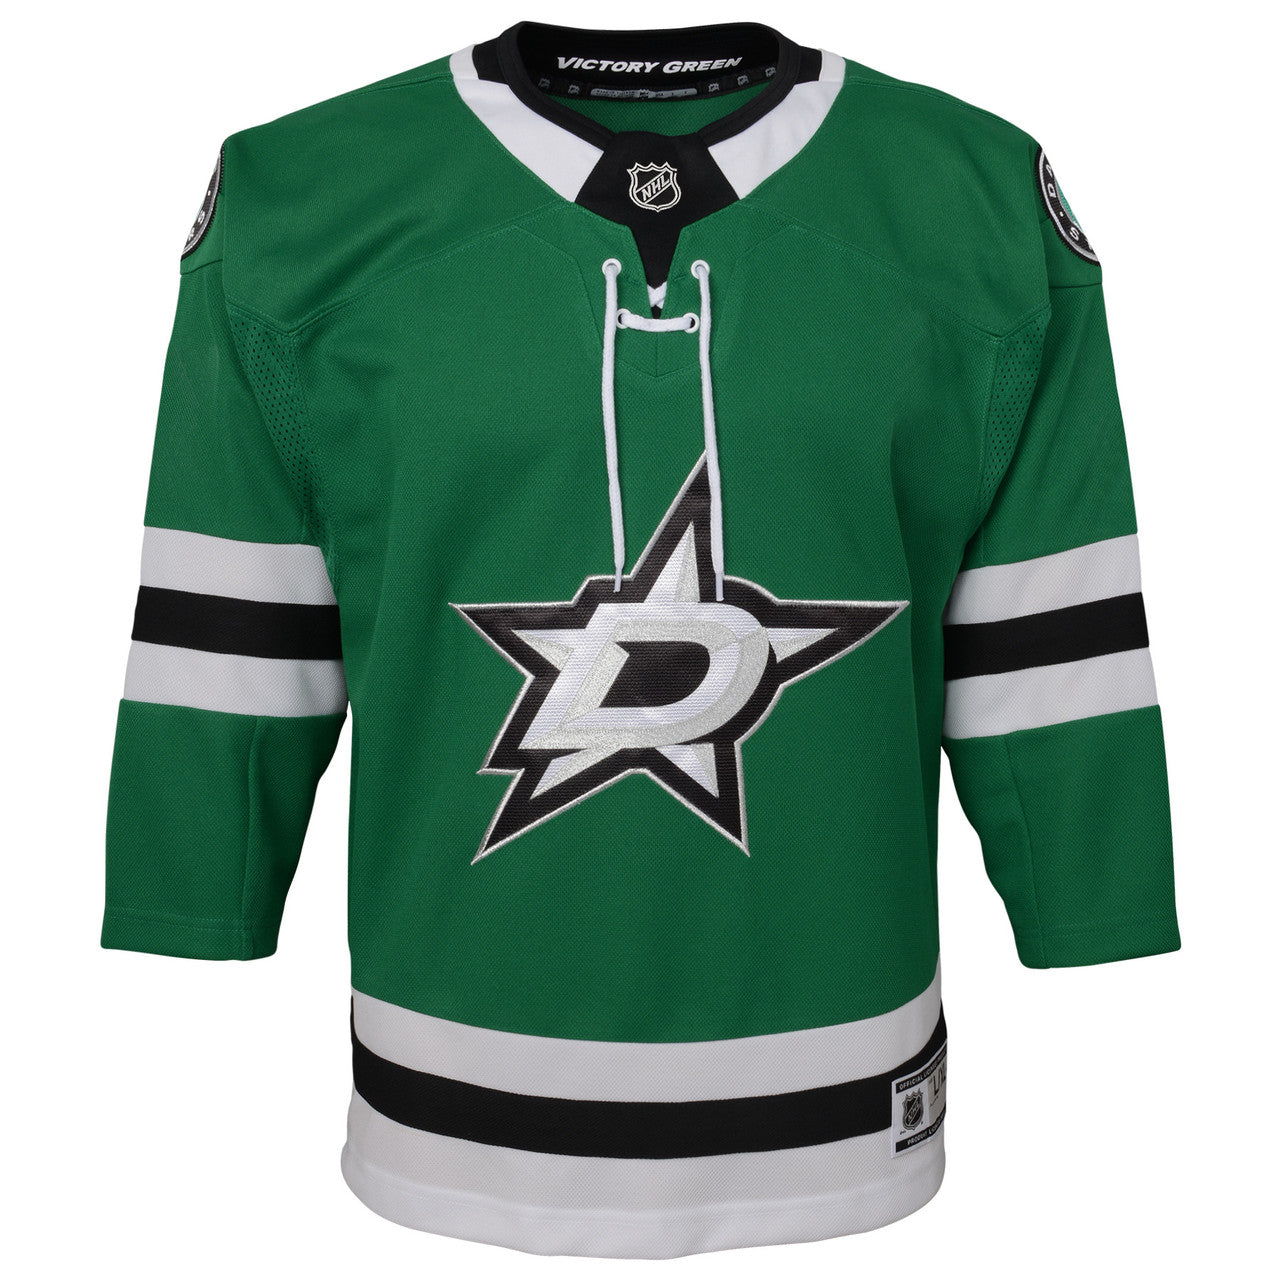 Dallas Stars Youth Outerstuff Blank Premier Jersey in Green - Front View